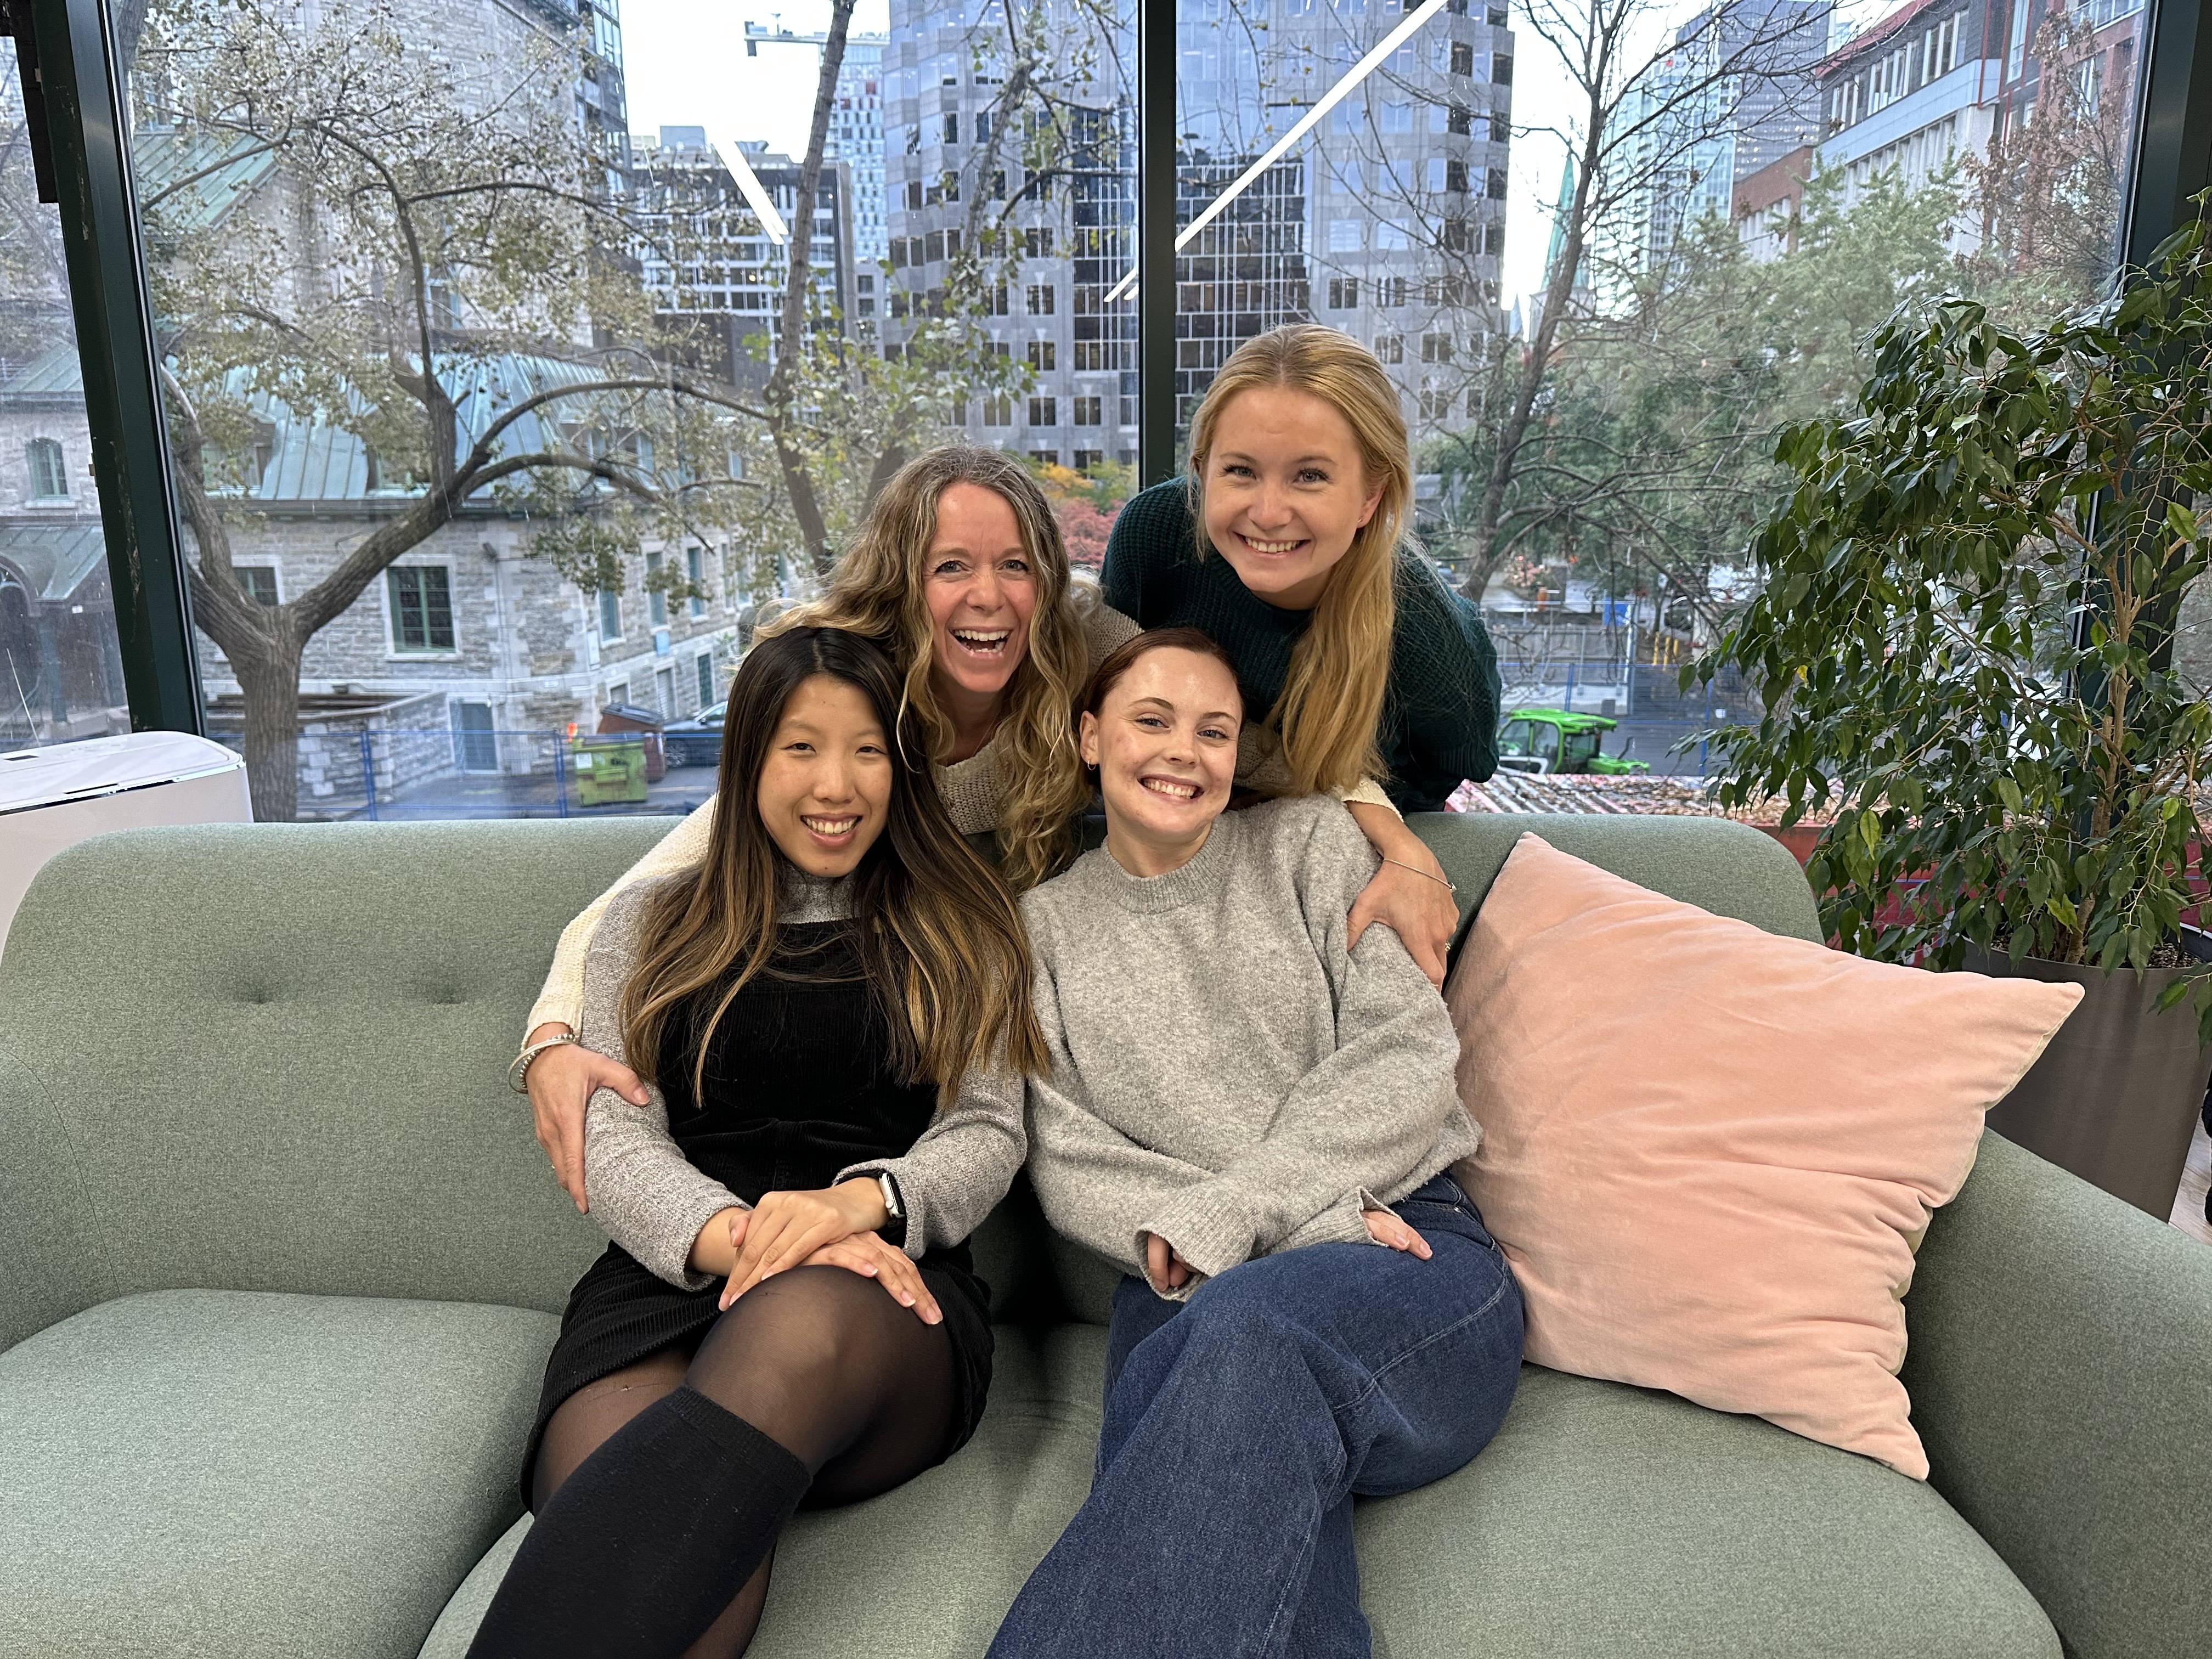 four women smiling with two sitting on a couch and two behind it.